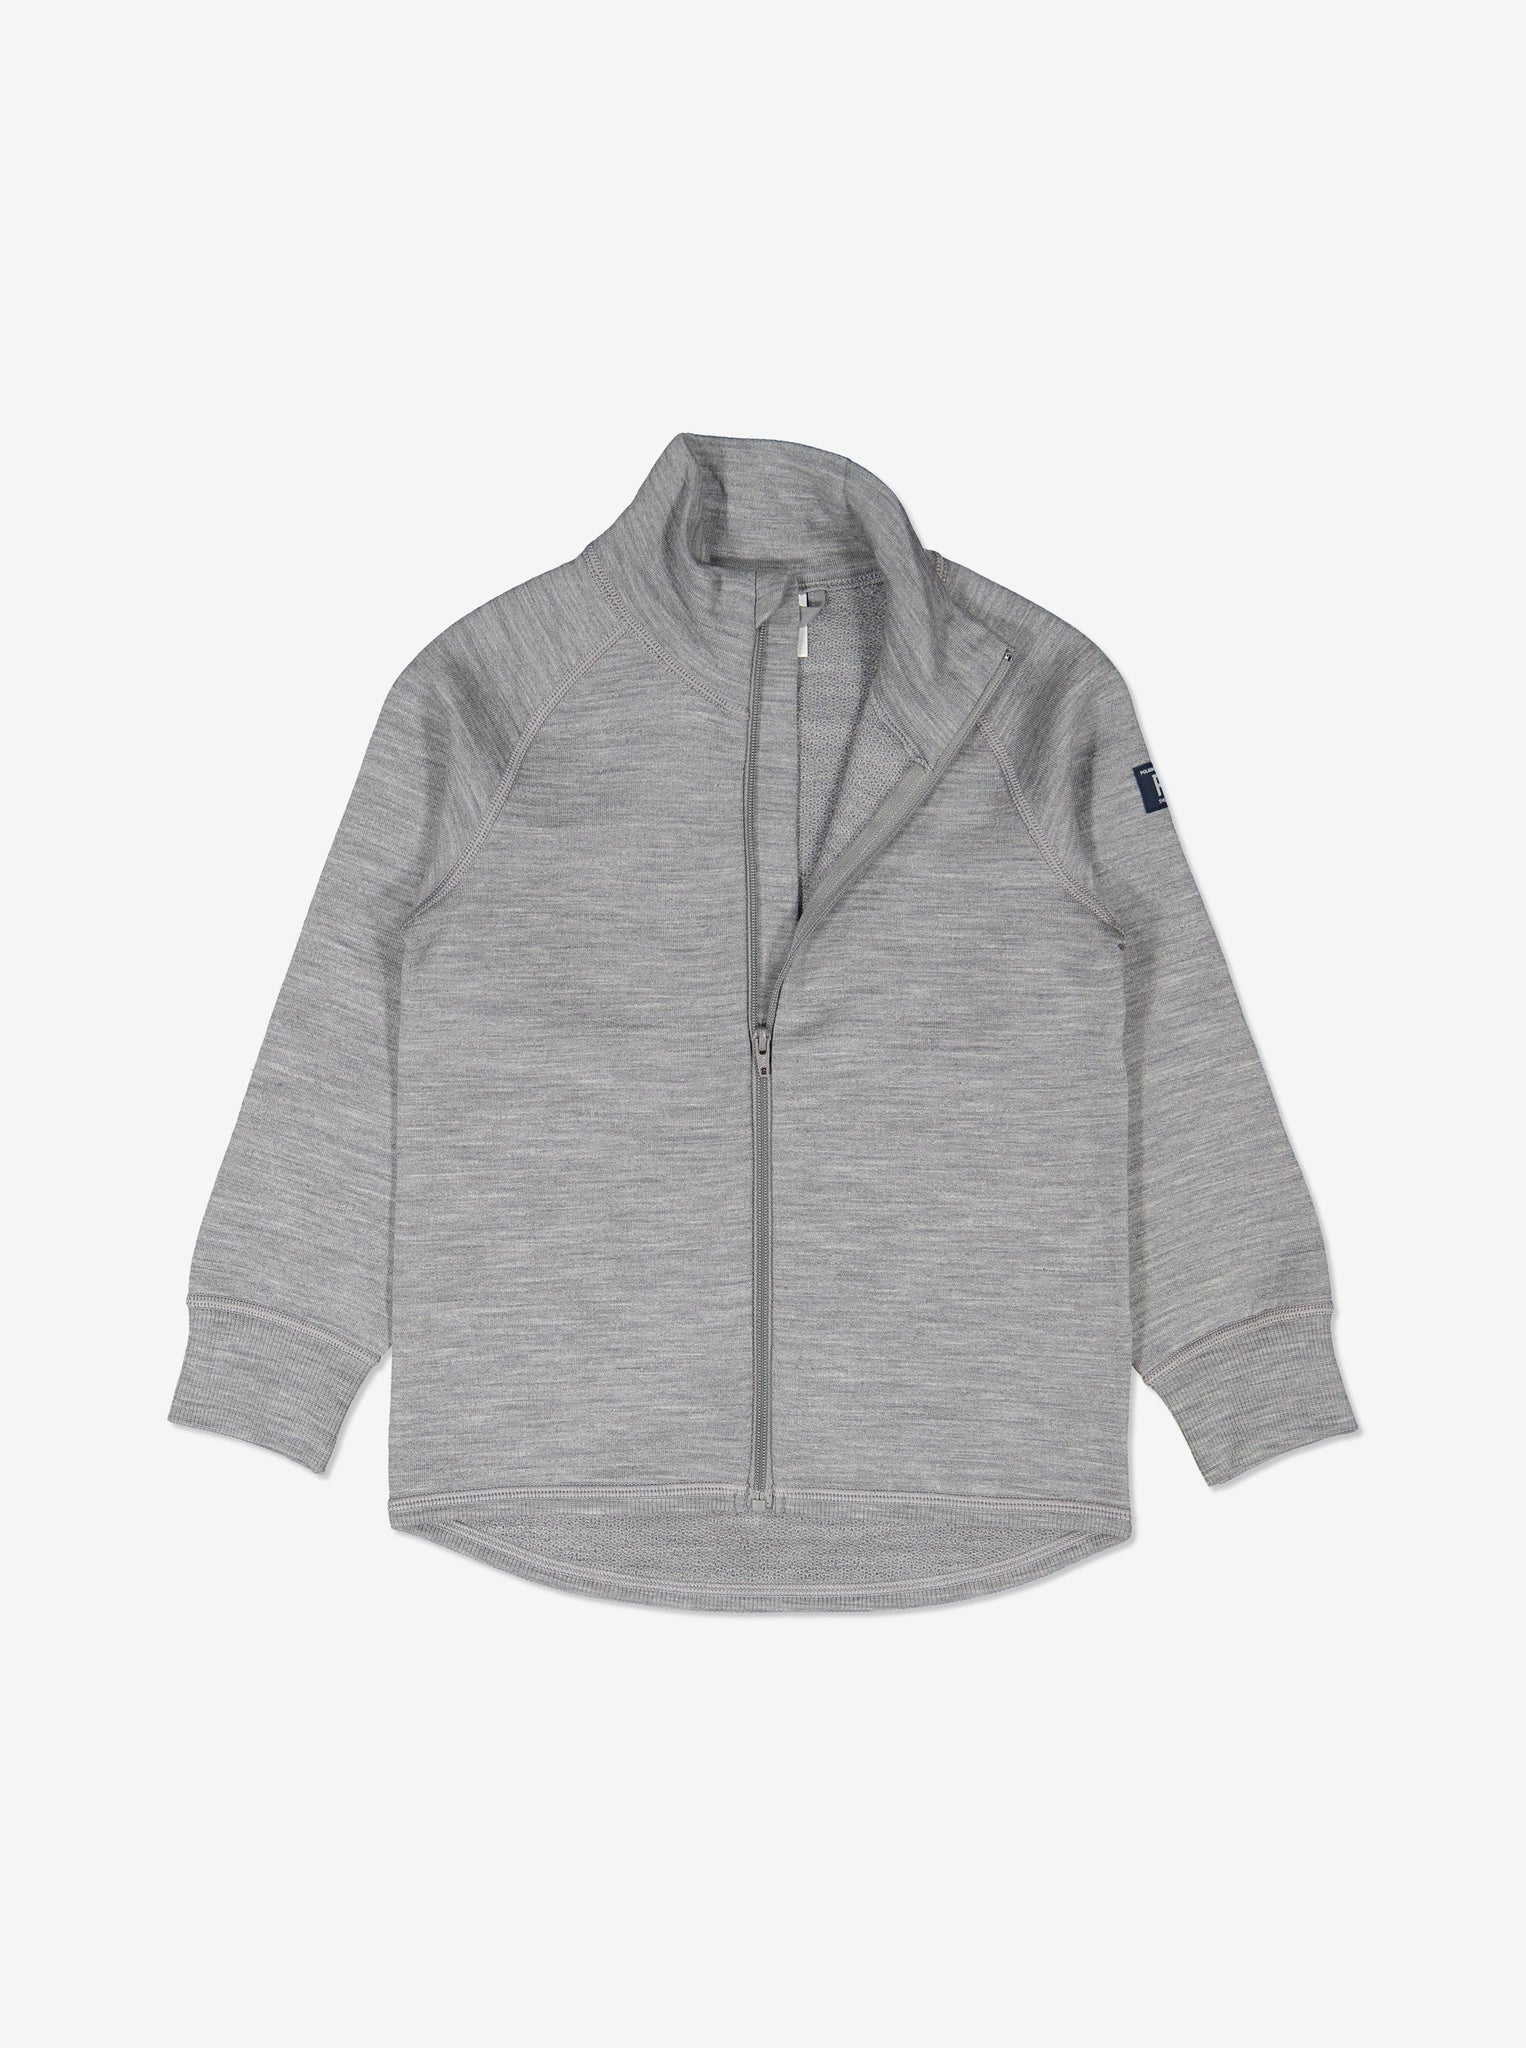  Merino Wool Grey Kids Jacket, warm soft and comfortable, durable quality, ethical long lasting polarn o. pyret